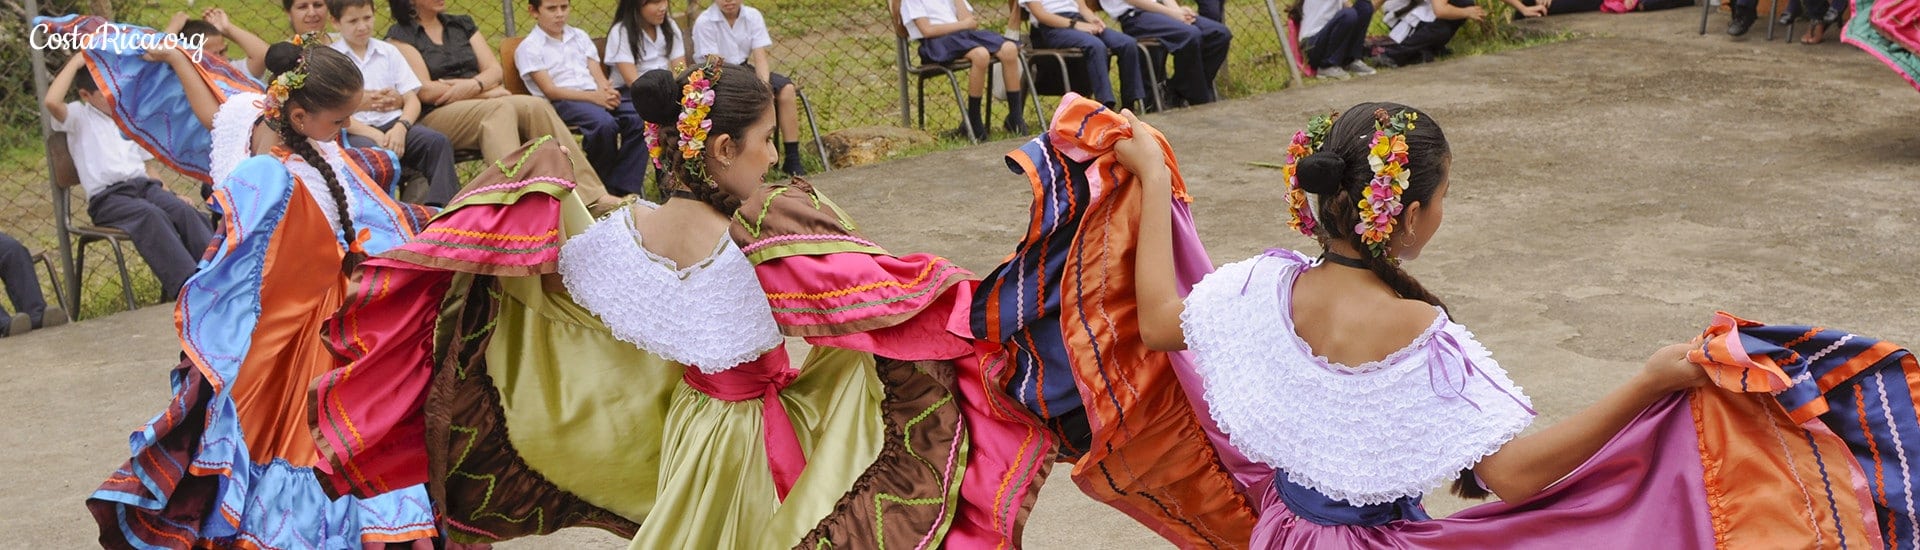 costa rican culture and traditions